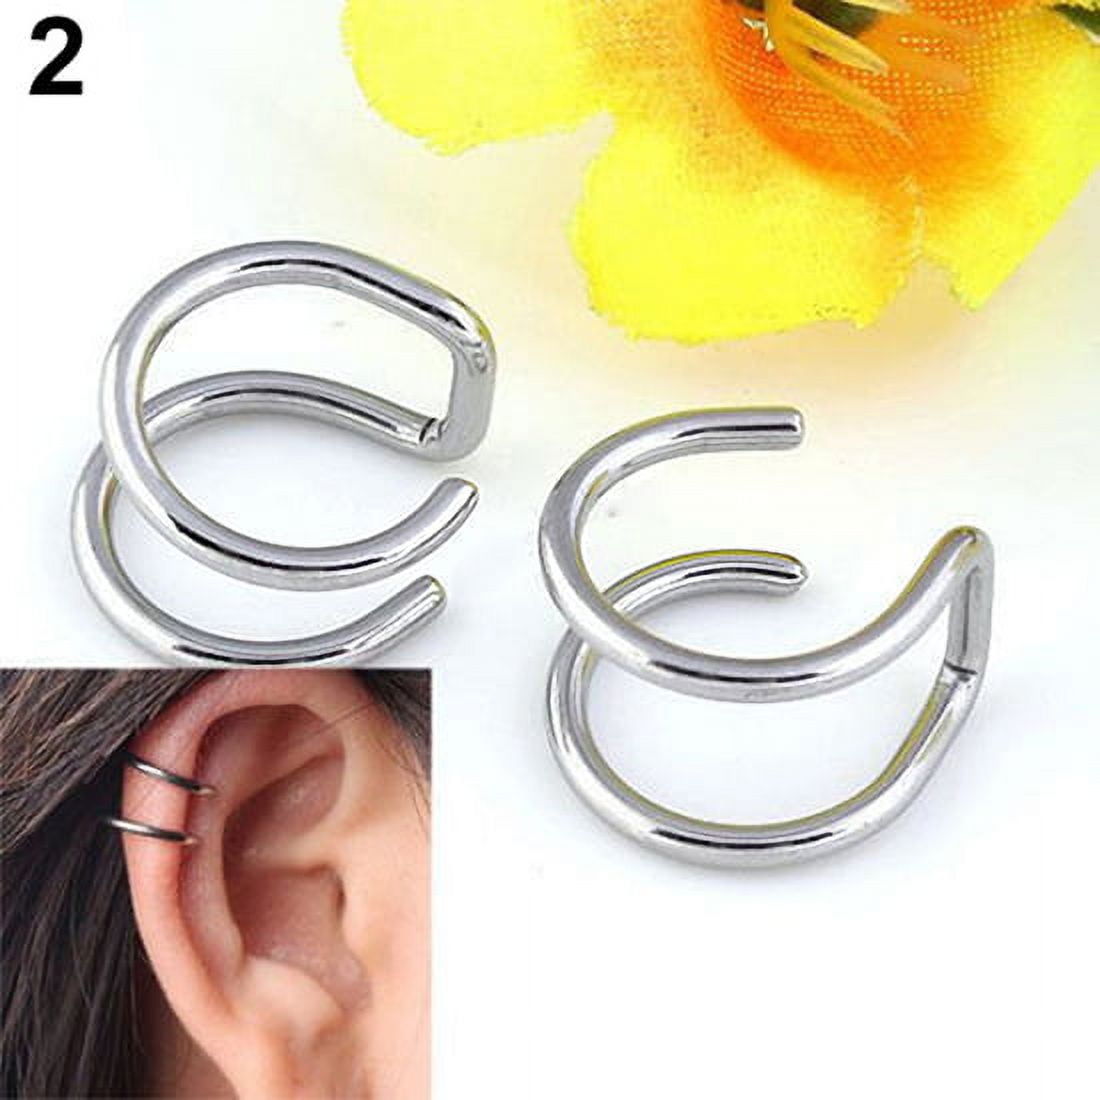 LAURITAMI Stainless Steel Ear Cuff Helix Cartilage India | Ubuy